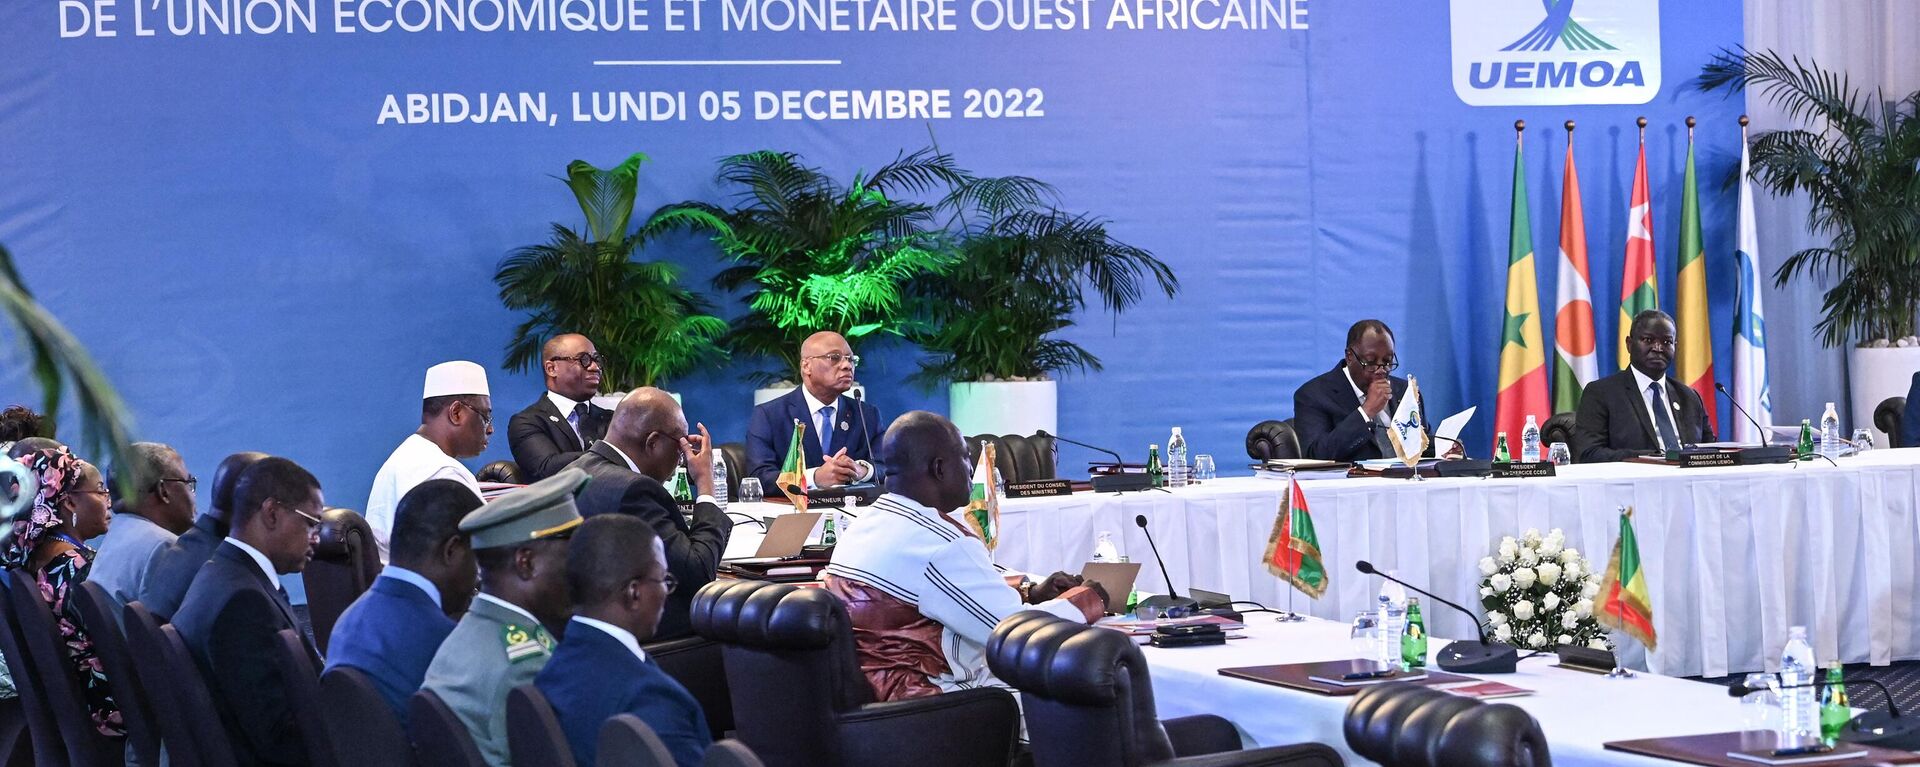 A general view of the plenary session of the West African Economic and Monetary Union (UEMOA) summit at the Sofitel Ivoire hotel in Abidjan on December 05, 2022. - Sputnik International, 1920, 06.12.2022